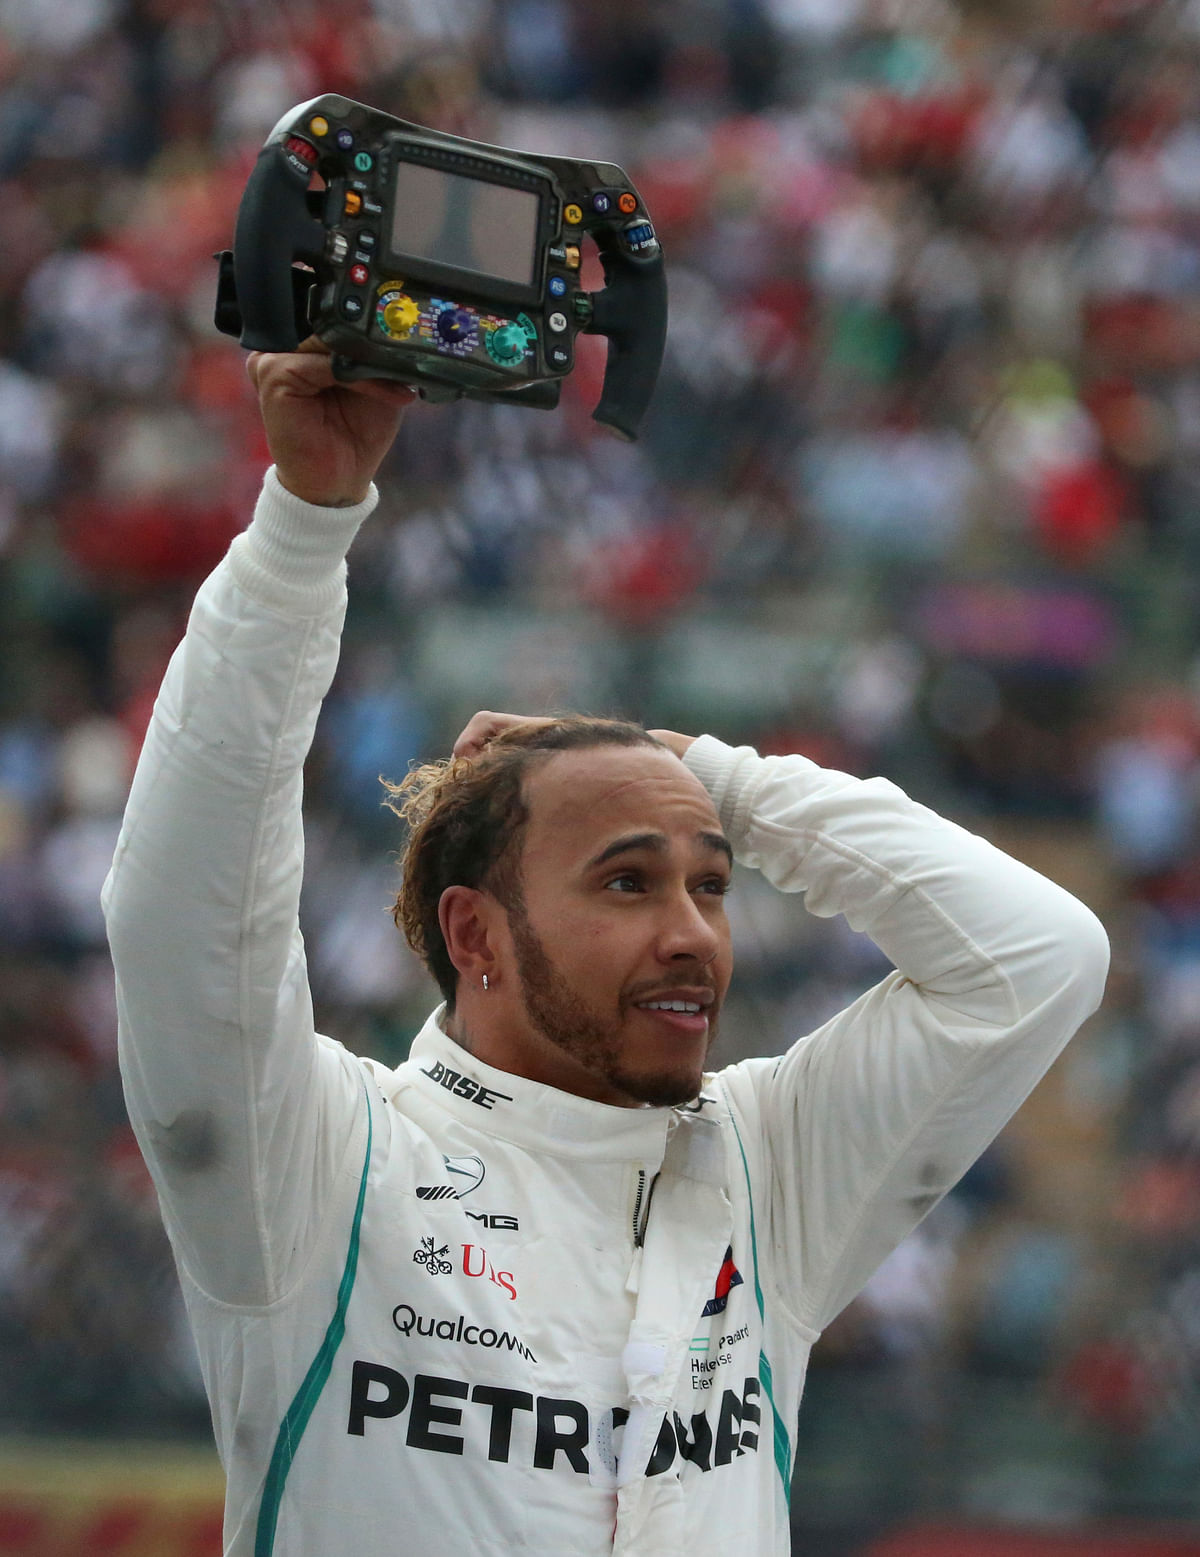 On Sunday, Lewis Hamilton became just the third driver to win a fifth Formula One world title.